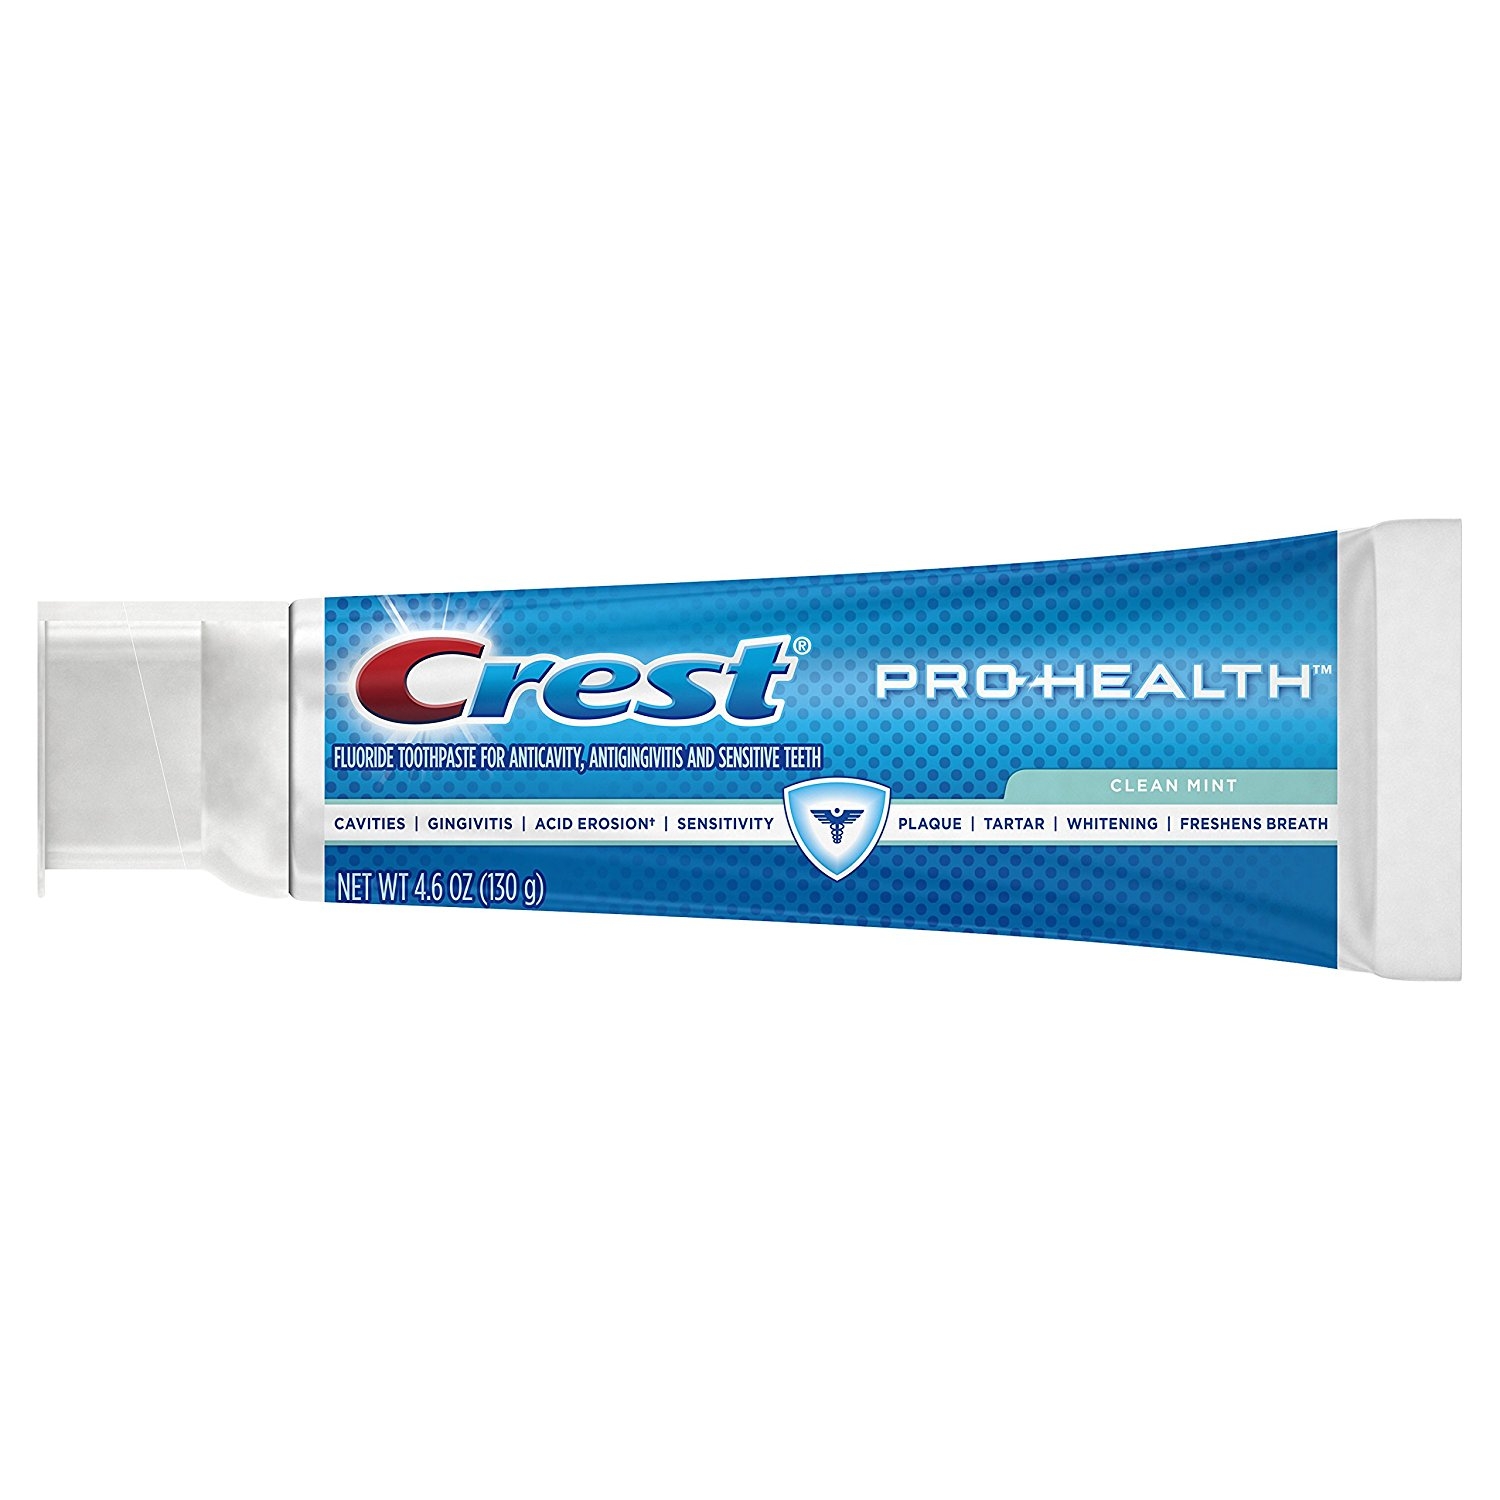 Crest Pro-Health Clean Mint Toothpaste, 4.6oz, Twin Pack - image 4 of 9